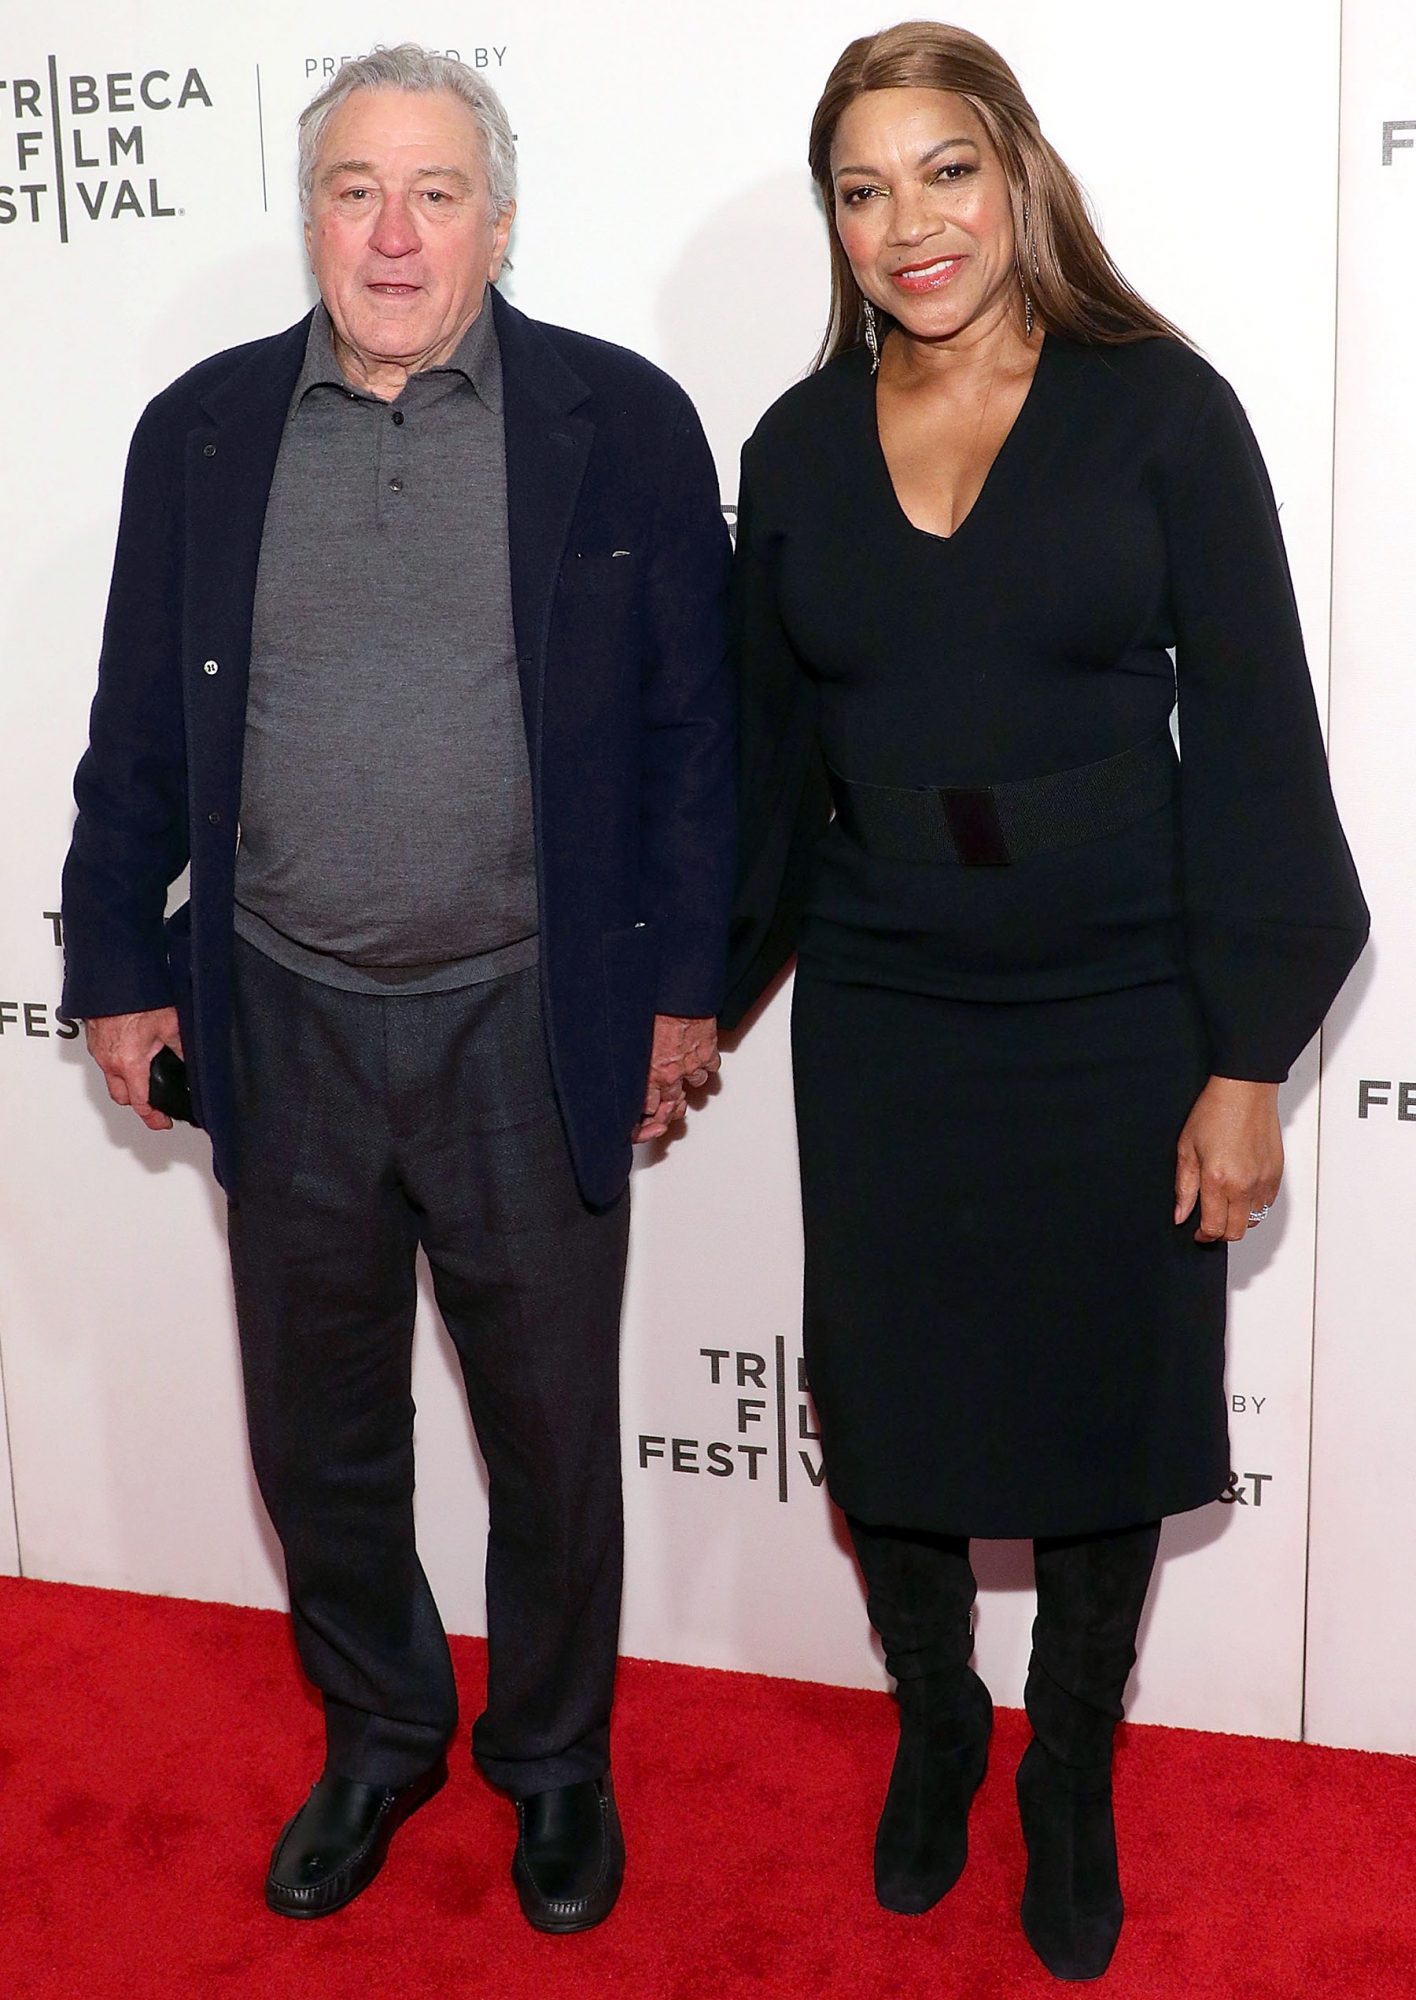 robert De Niro Speaks Out About Difficult Split From Wife Peoplecom